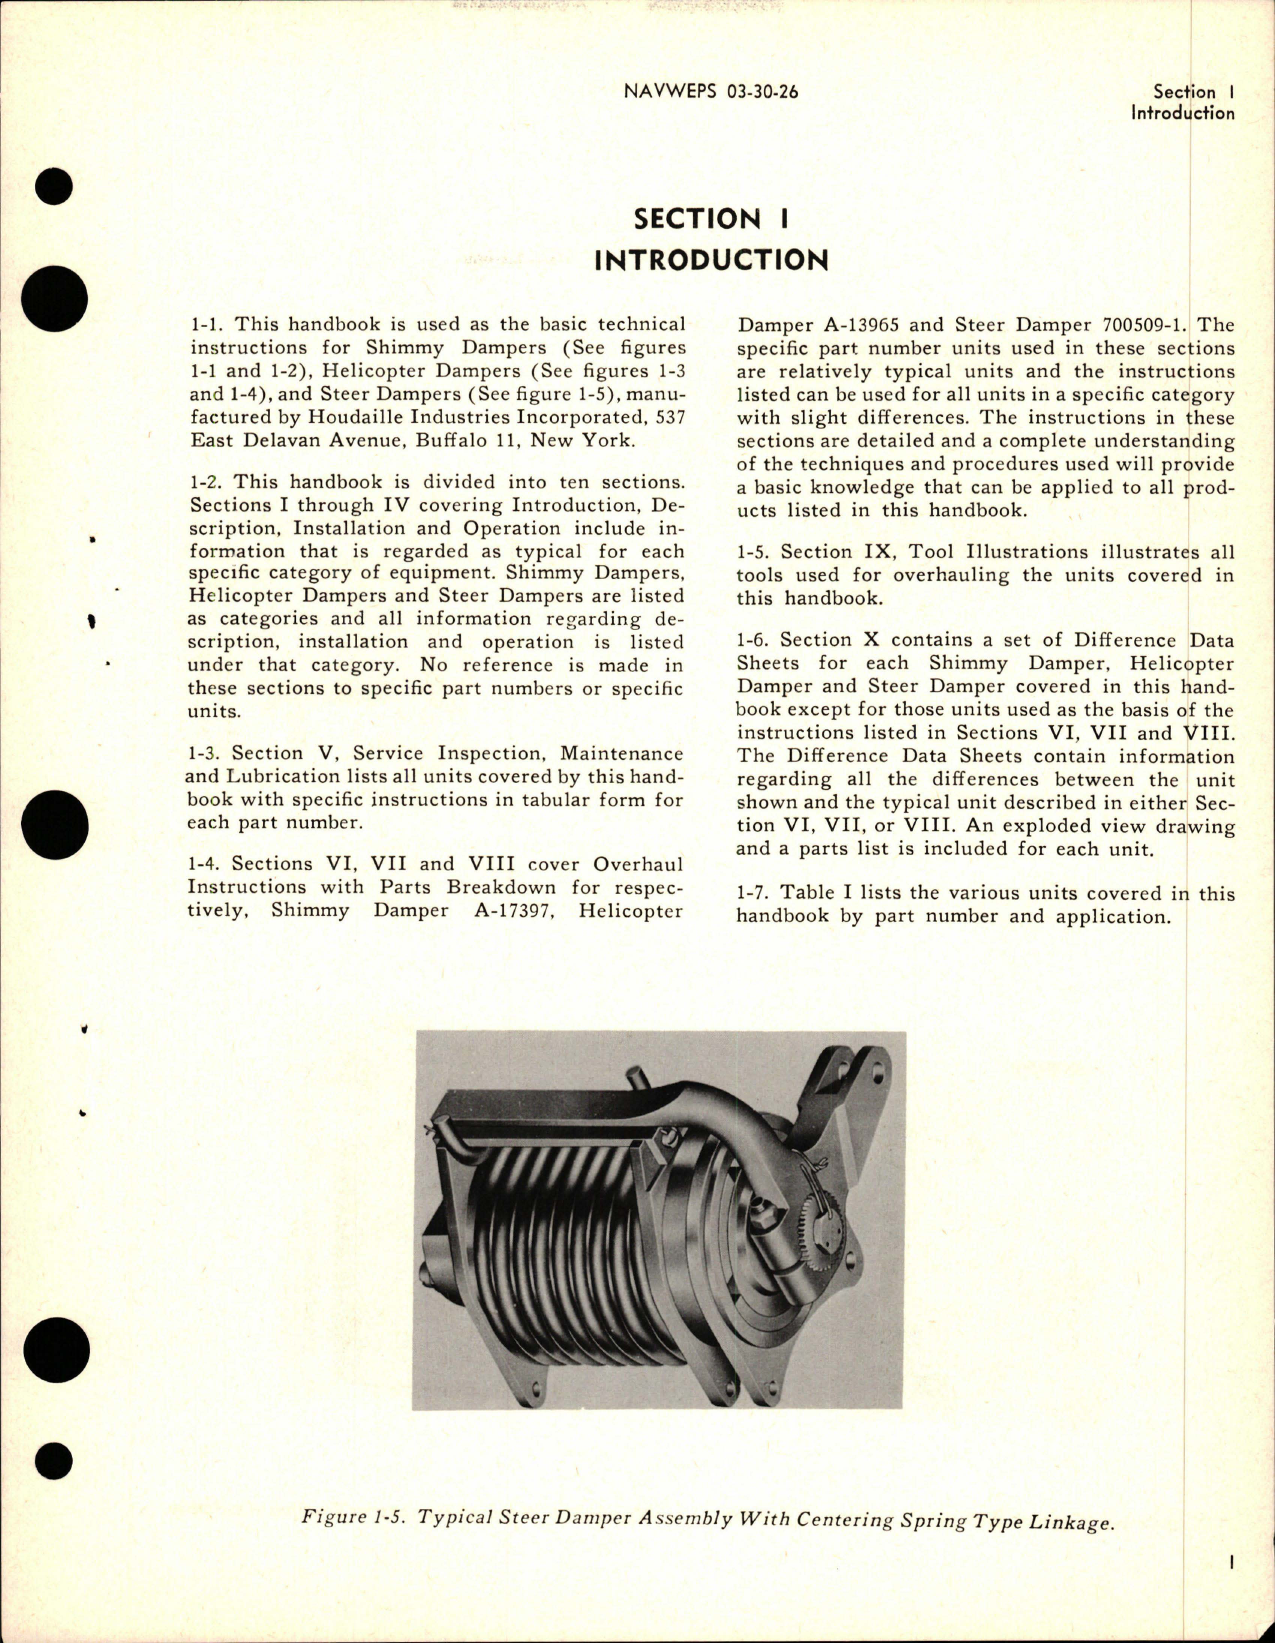 Sample page 5 from AirCorps Library document: Operation, Service and Overhaul Instructions with Illustrated Parts for Shimmy Dampers - Helicopter Dampers - Steer Dampers